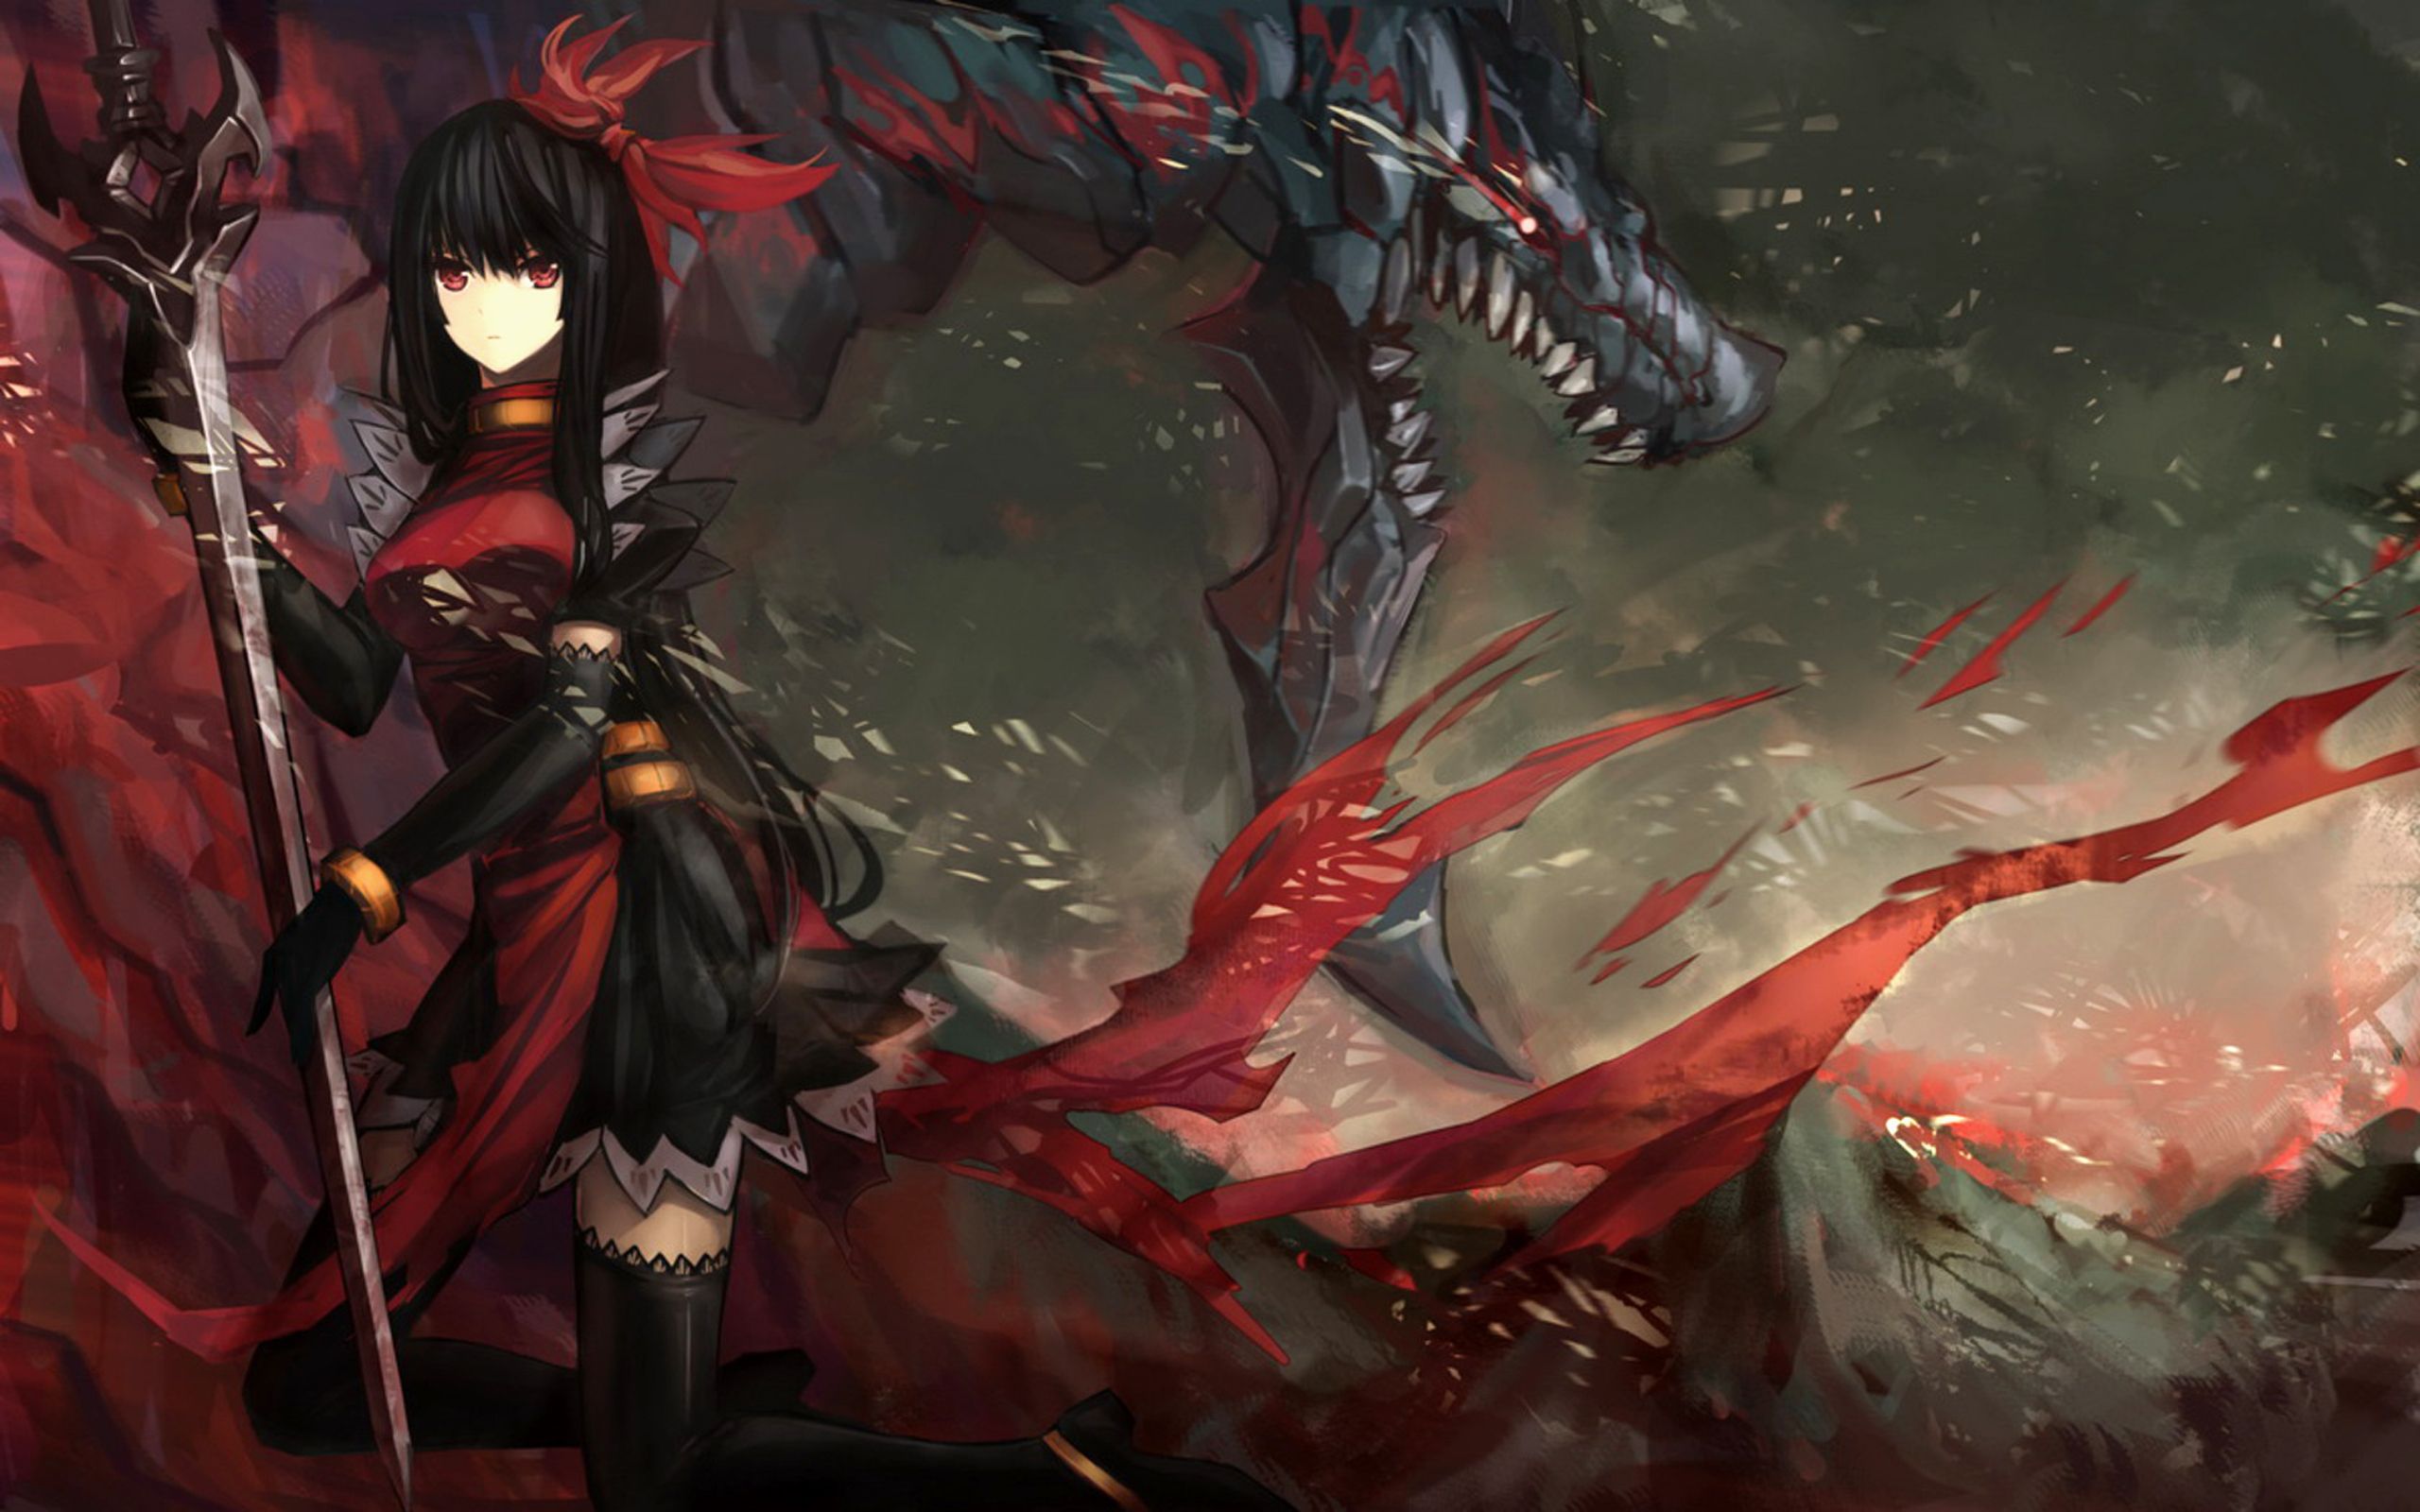 Girl Dragon Monster Mouth Sword Stockings Picture Anime